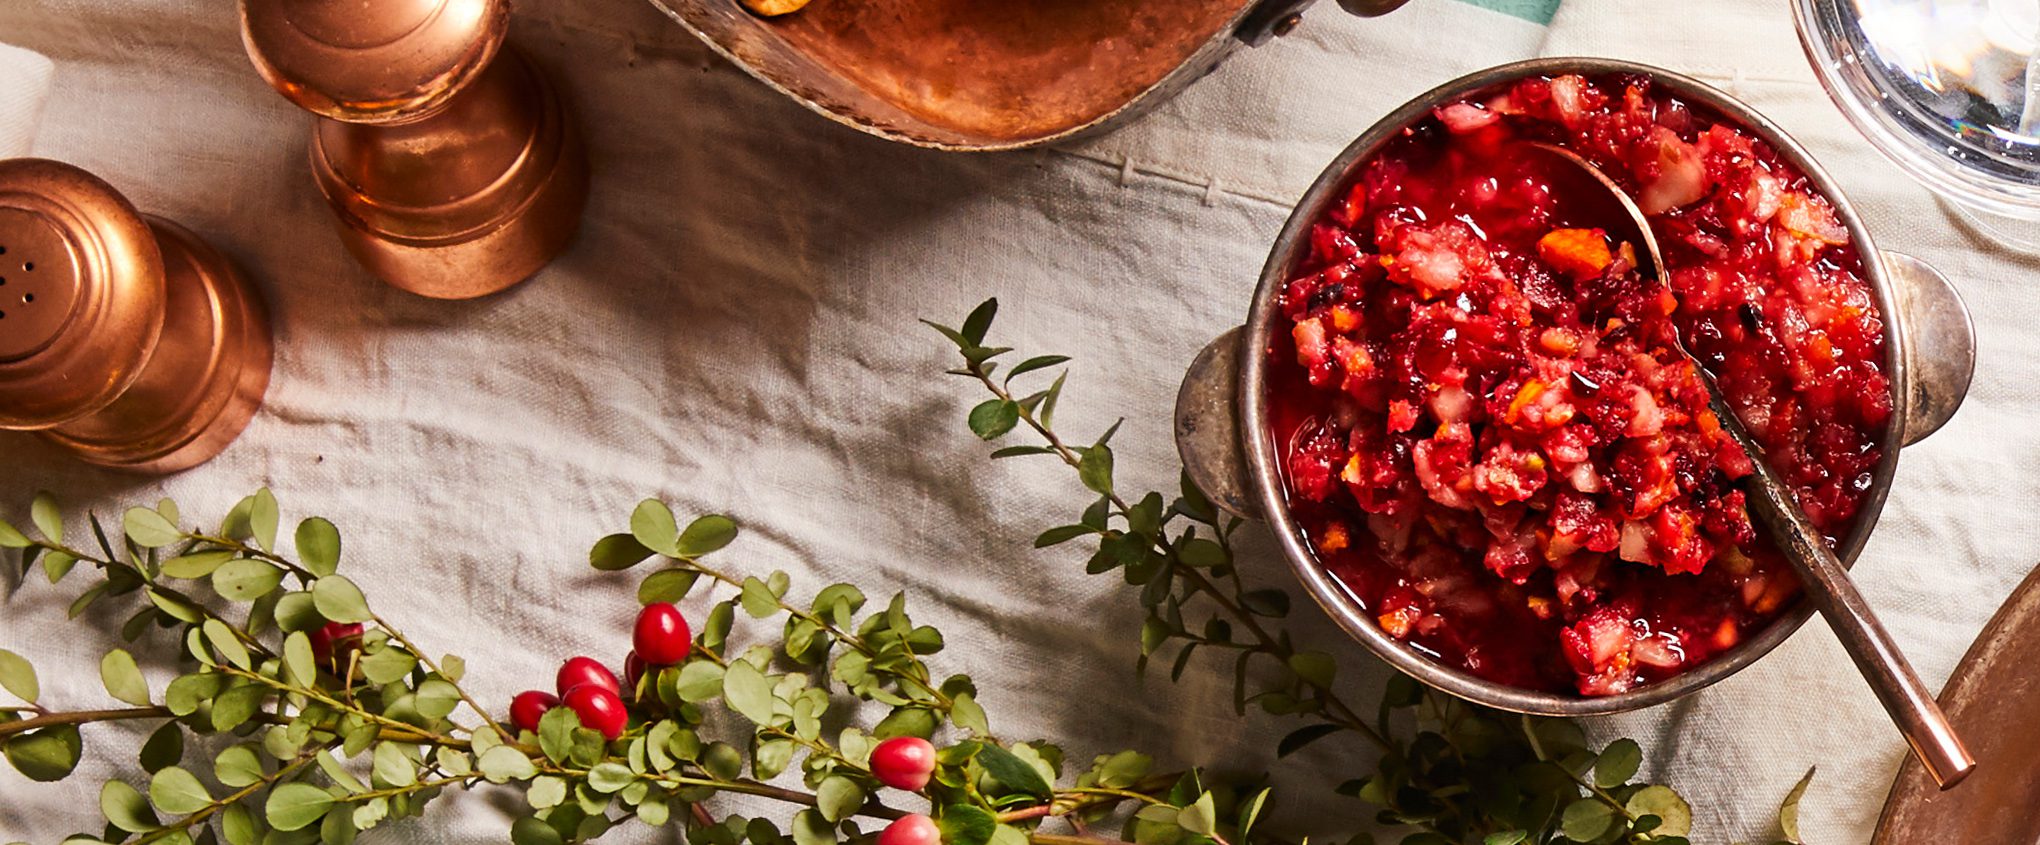 Cranberry-Pear Relish